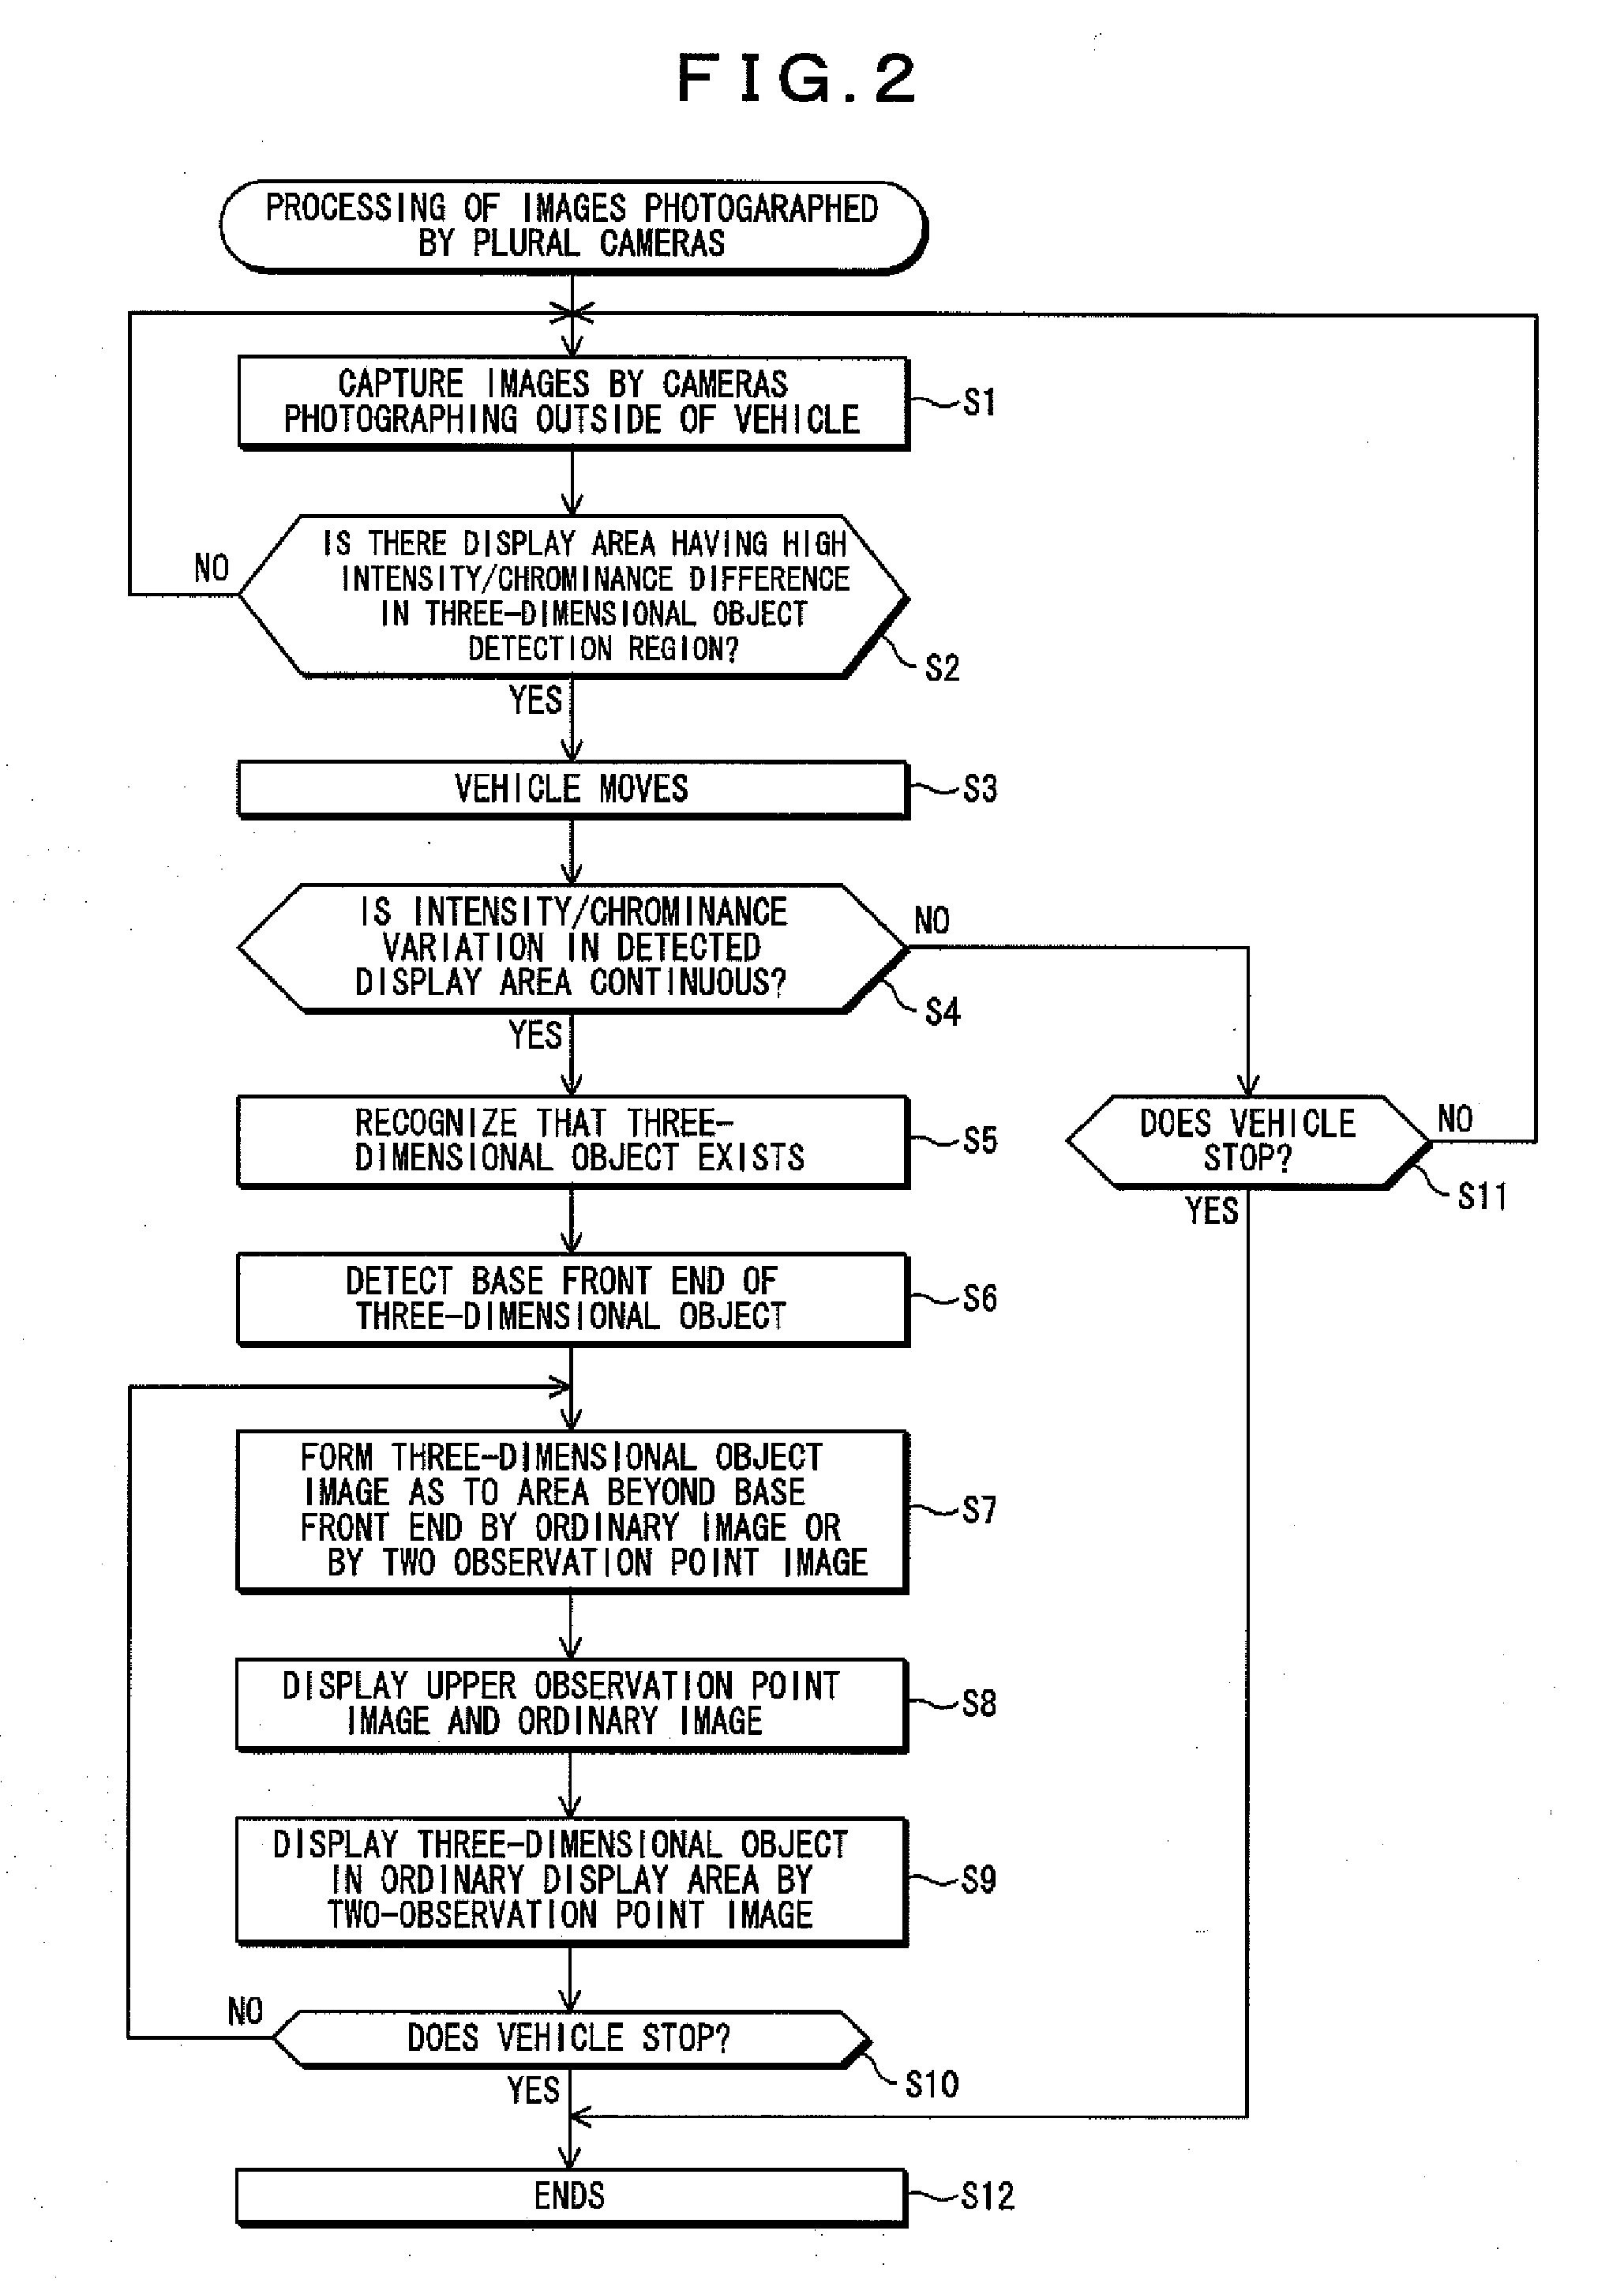 Method of Processing Images Photographed by Plural Cameras And Apparatus For The Same